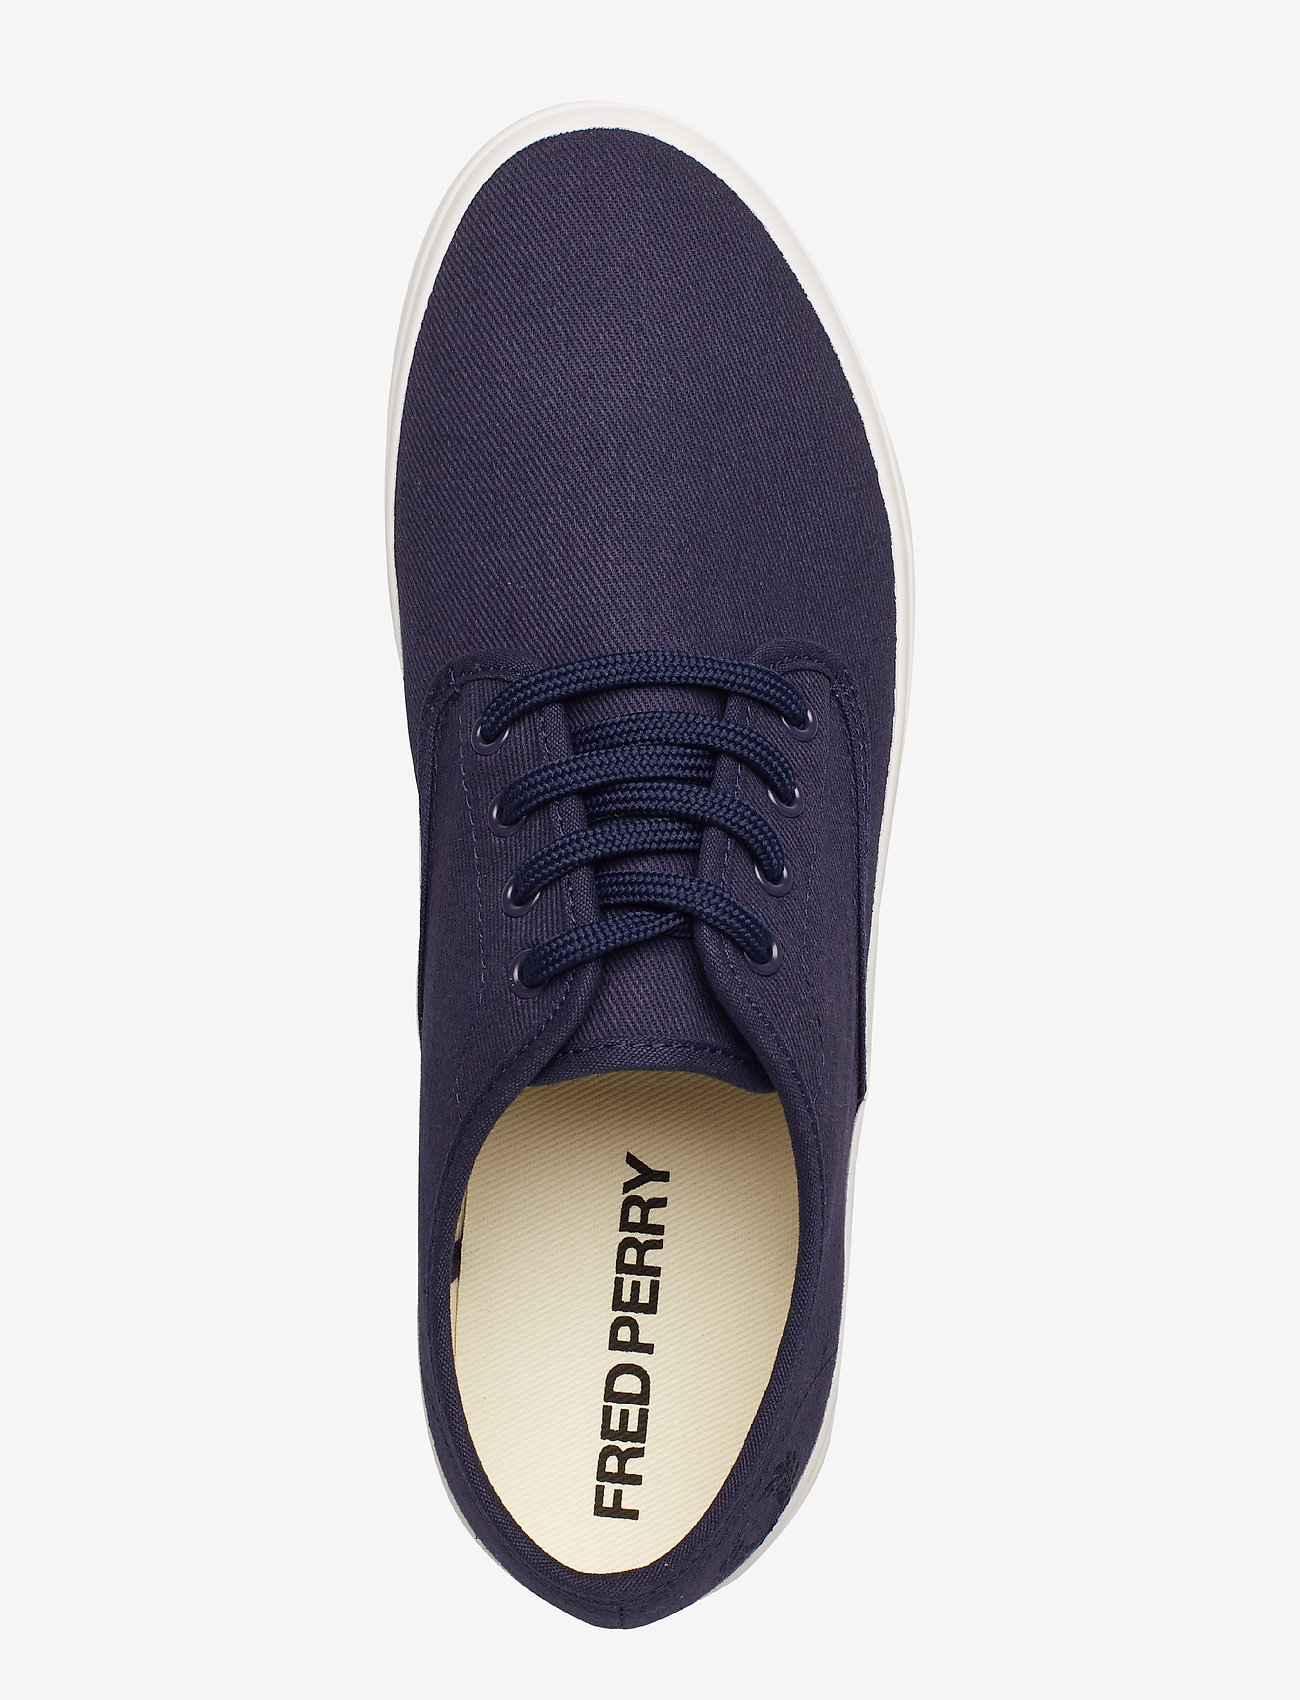 Merton Twill (Carbon Blue) - Fred Perry rRVebS